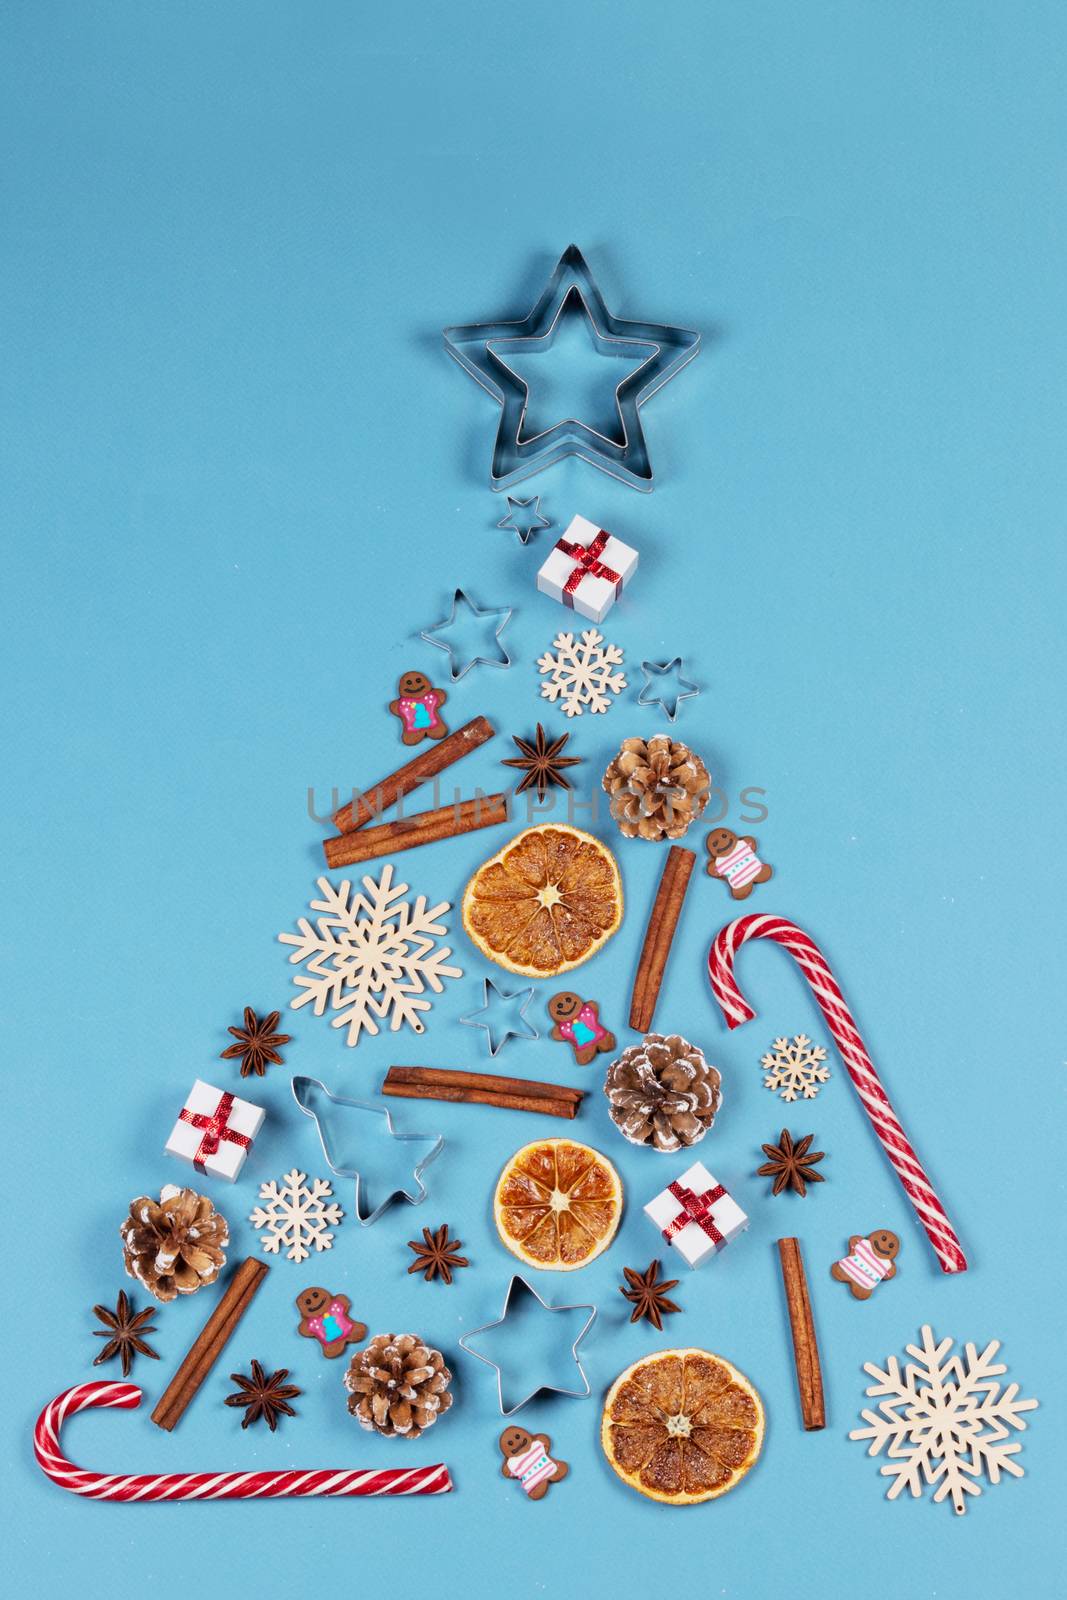 Christmas Tree made of decor on blue paper background. Christmas Holiday Concept. Flat Lay